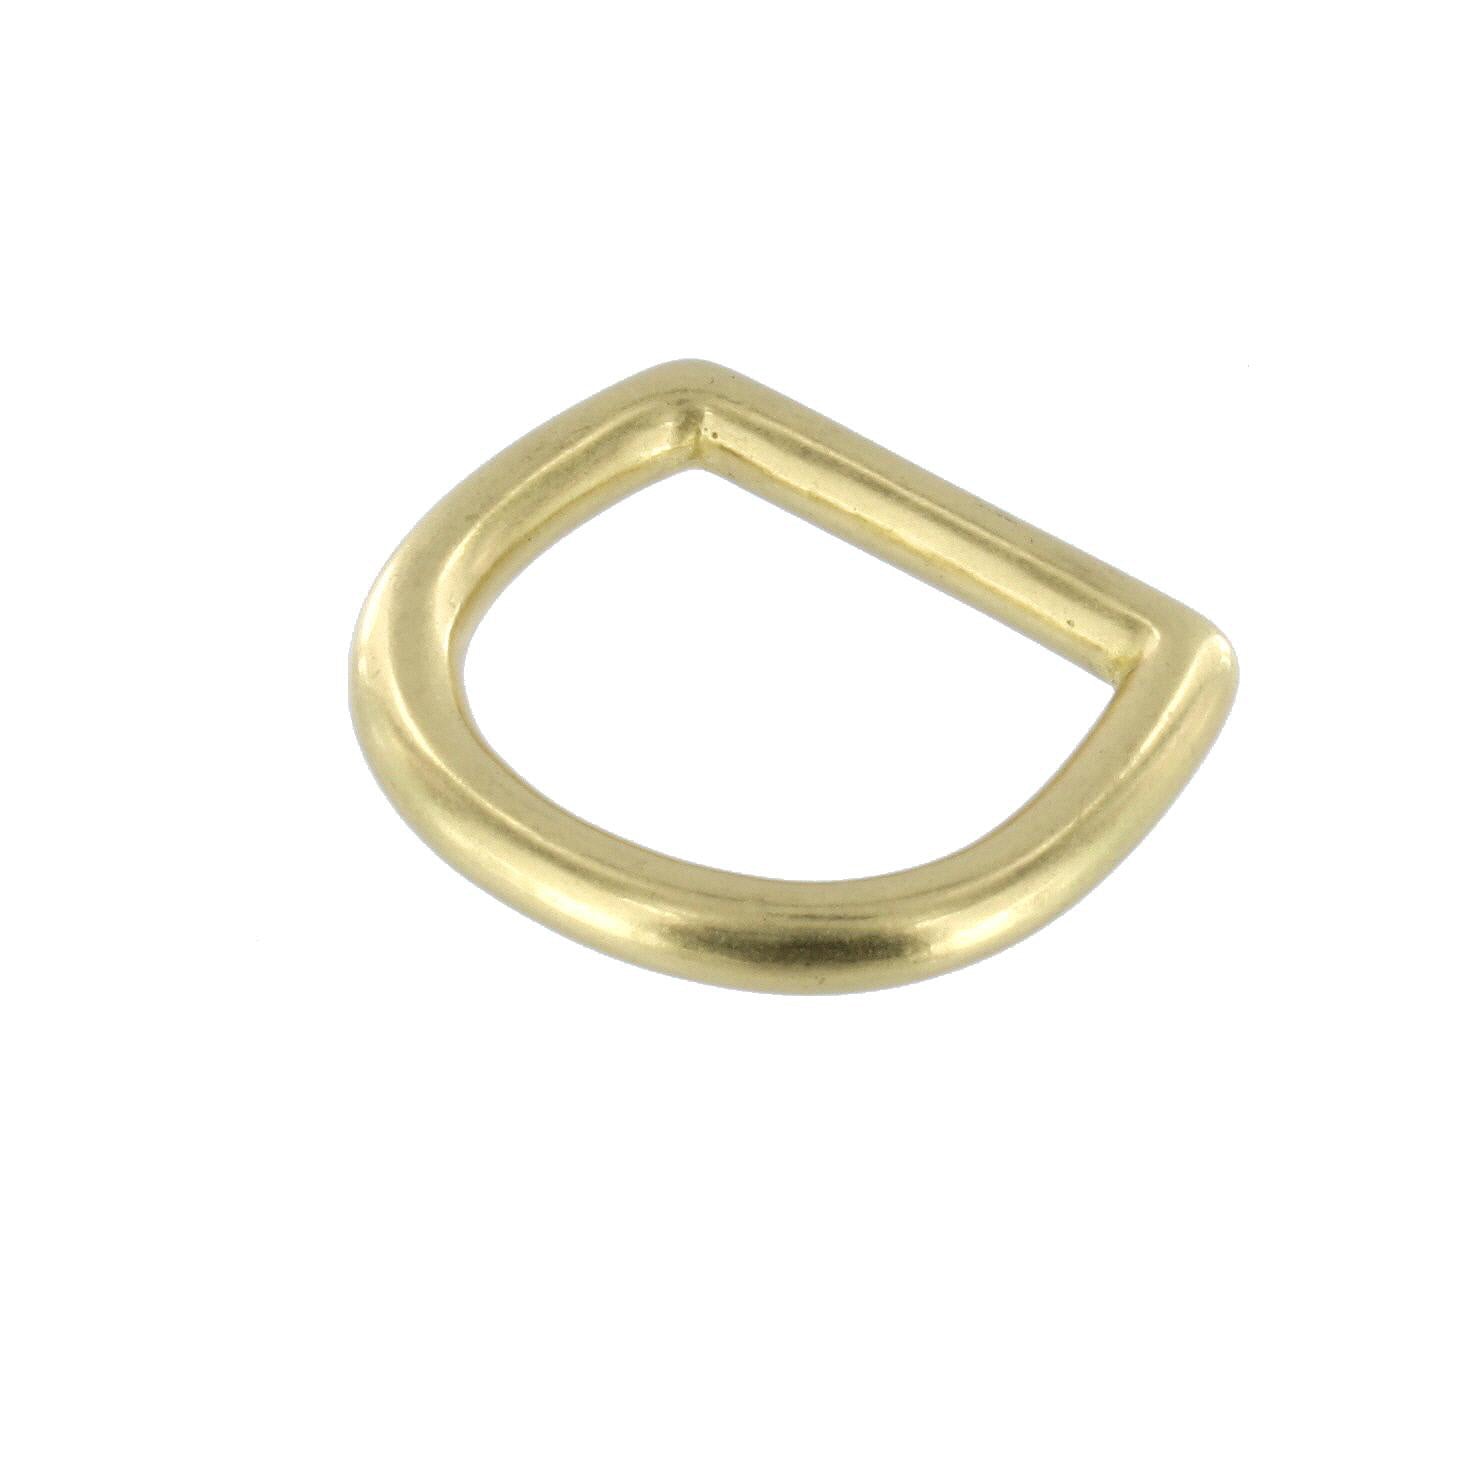 1/2 Solid Brass O Ring - Leathersmith Designs Inc.